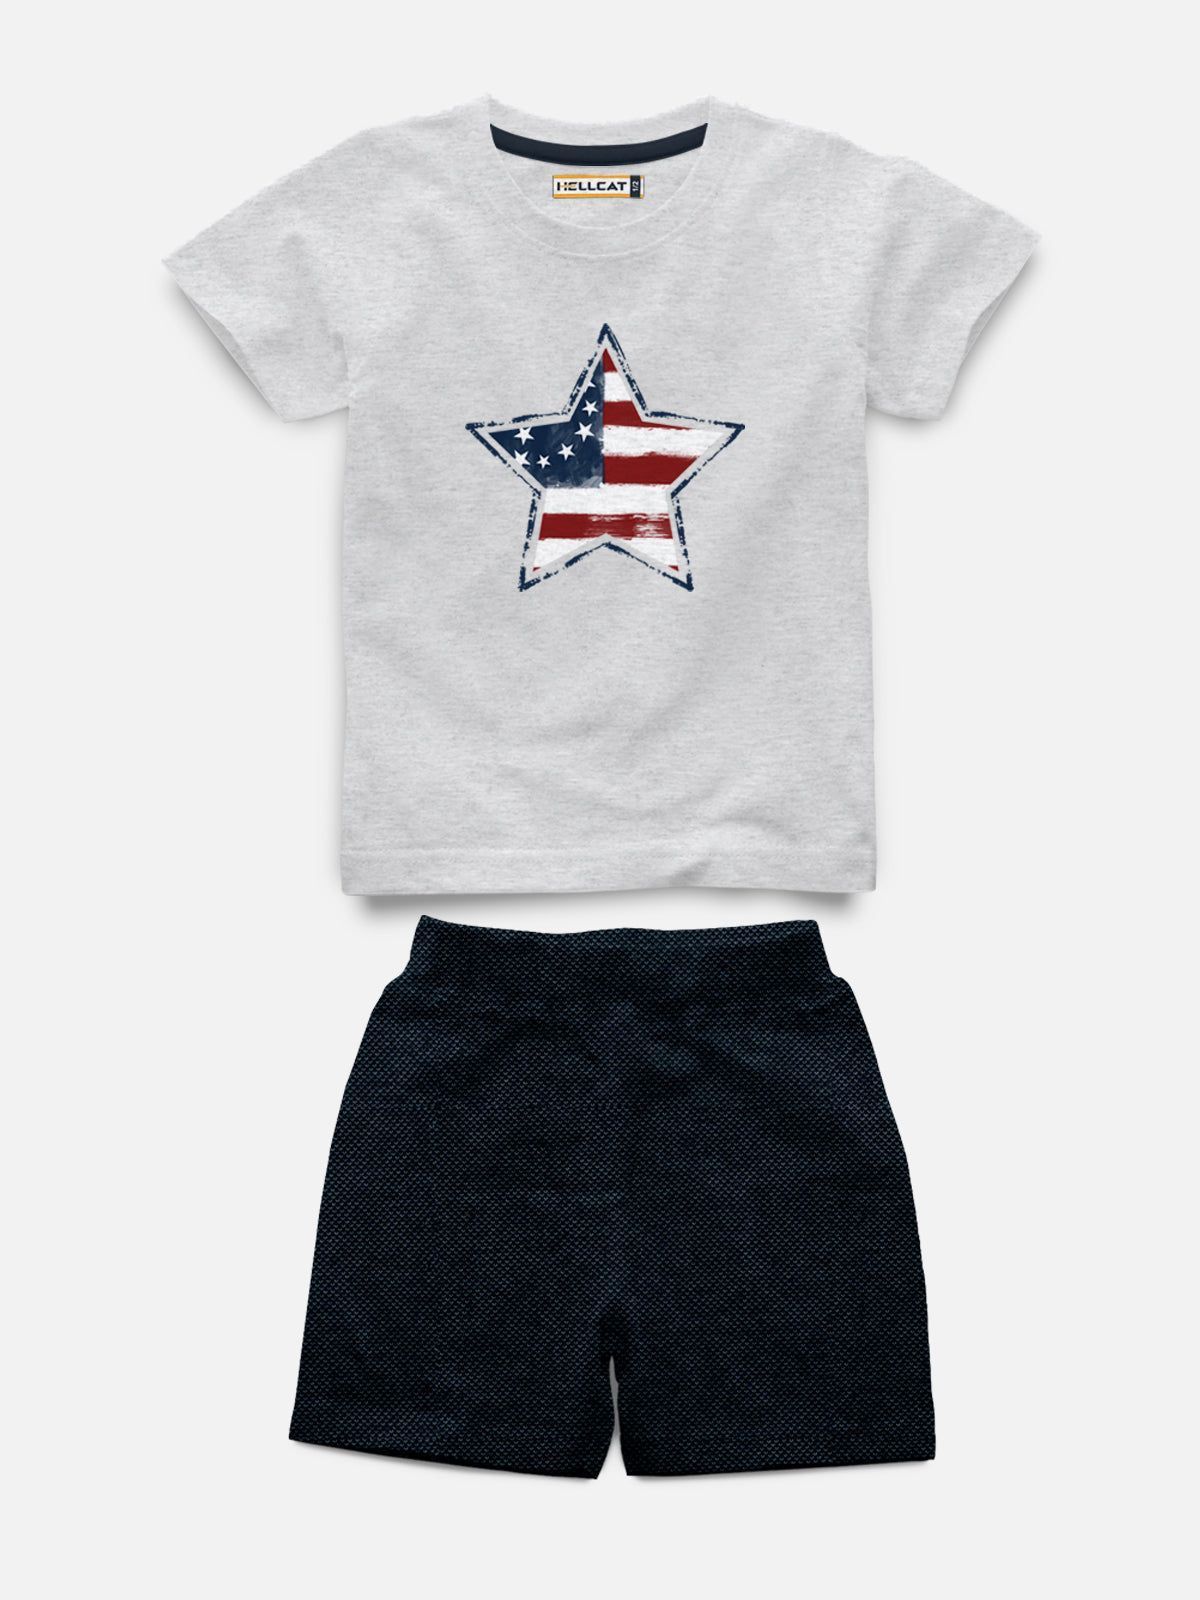 Half Sleeve Printed Tshirt with Comfy Solid Shorts for Infants & Toddler - Pack of 2 (1 T-shirt & 1 short)